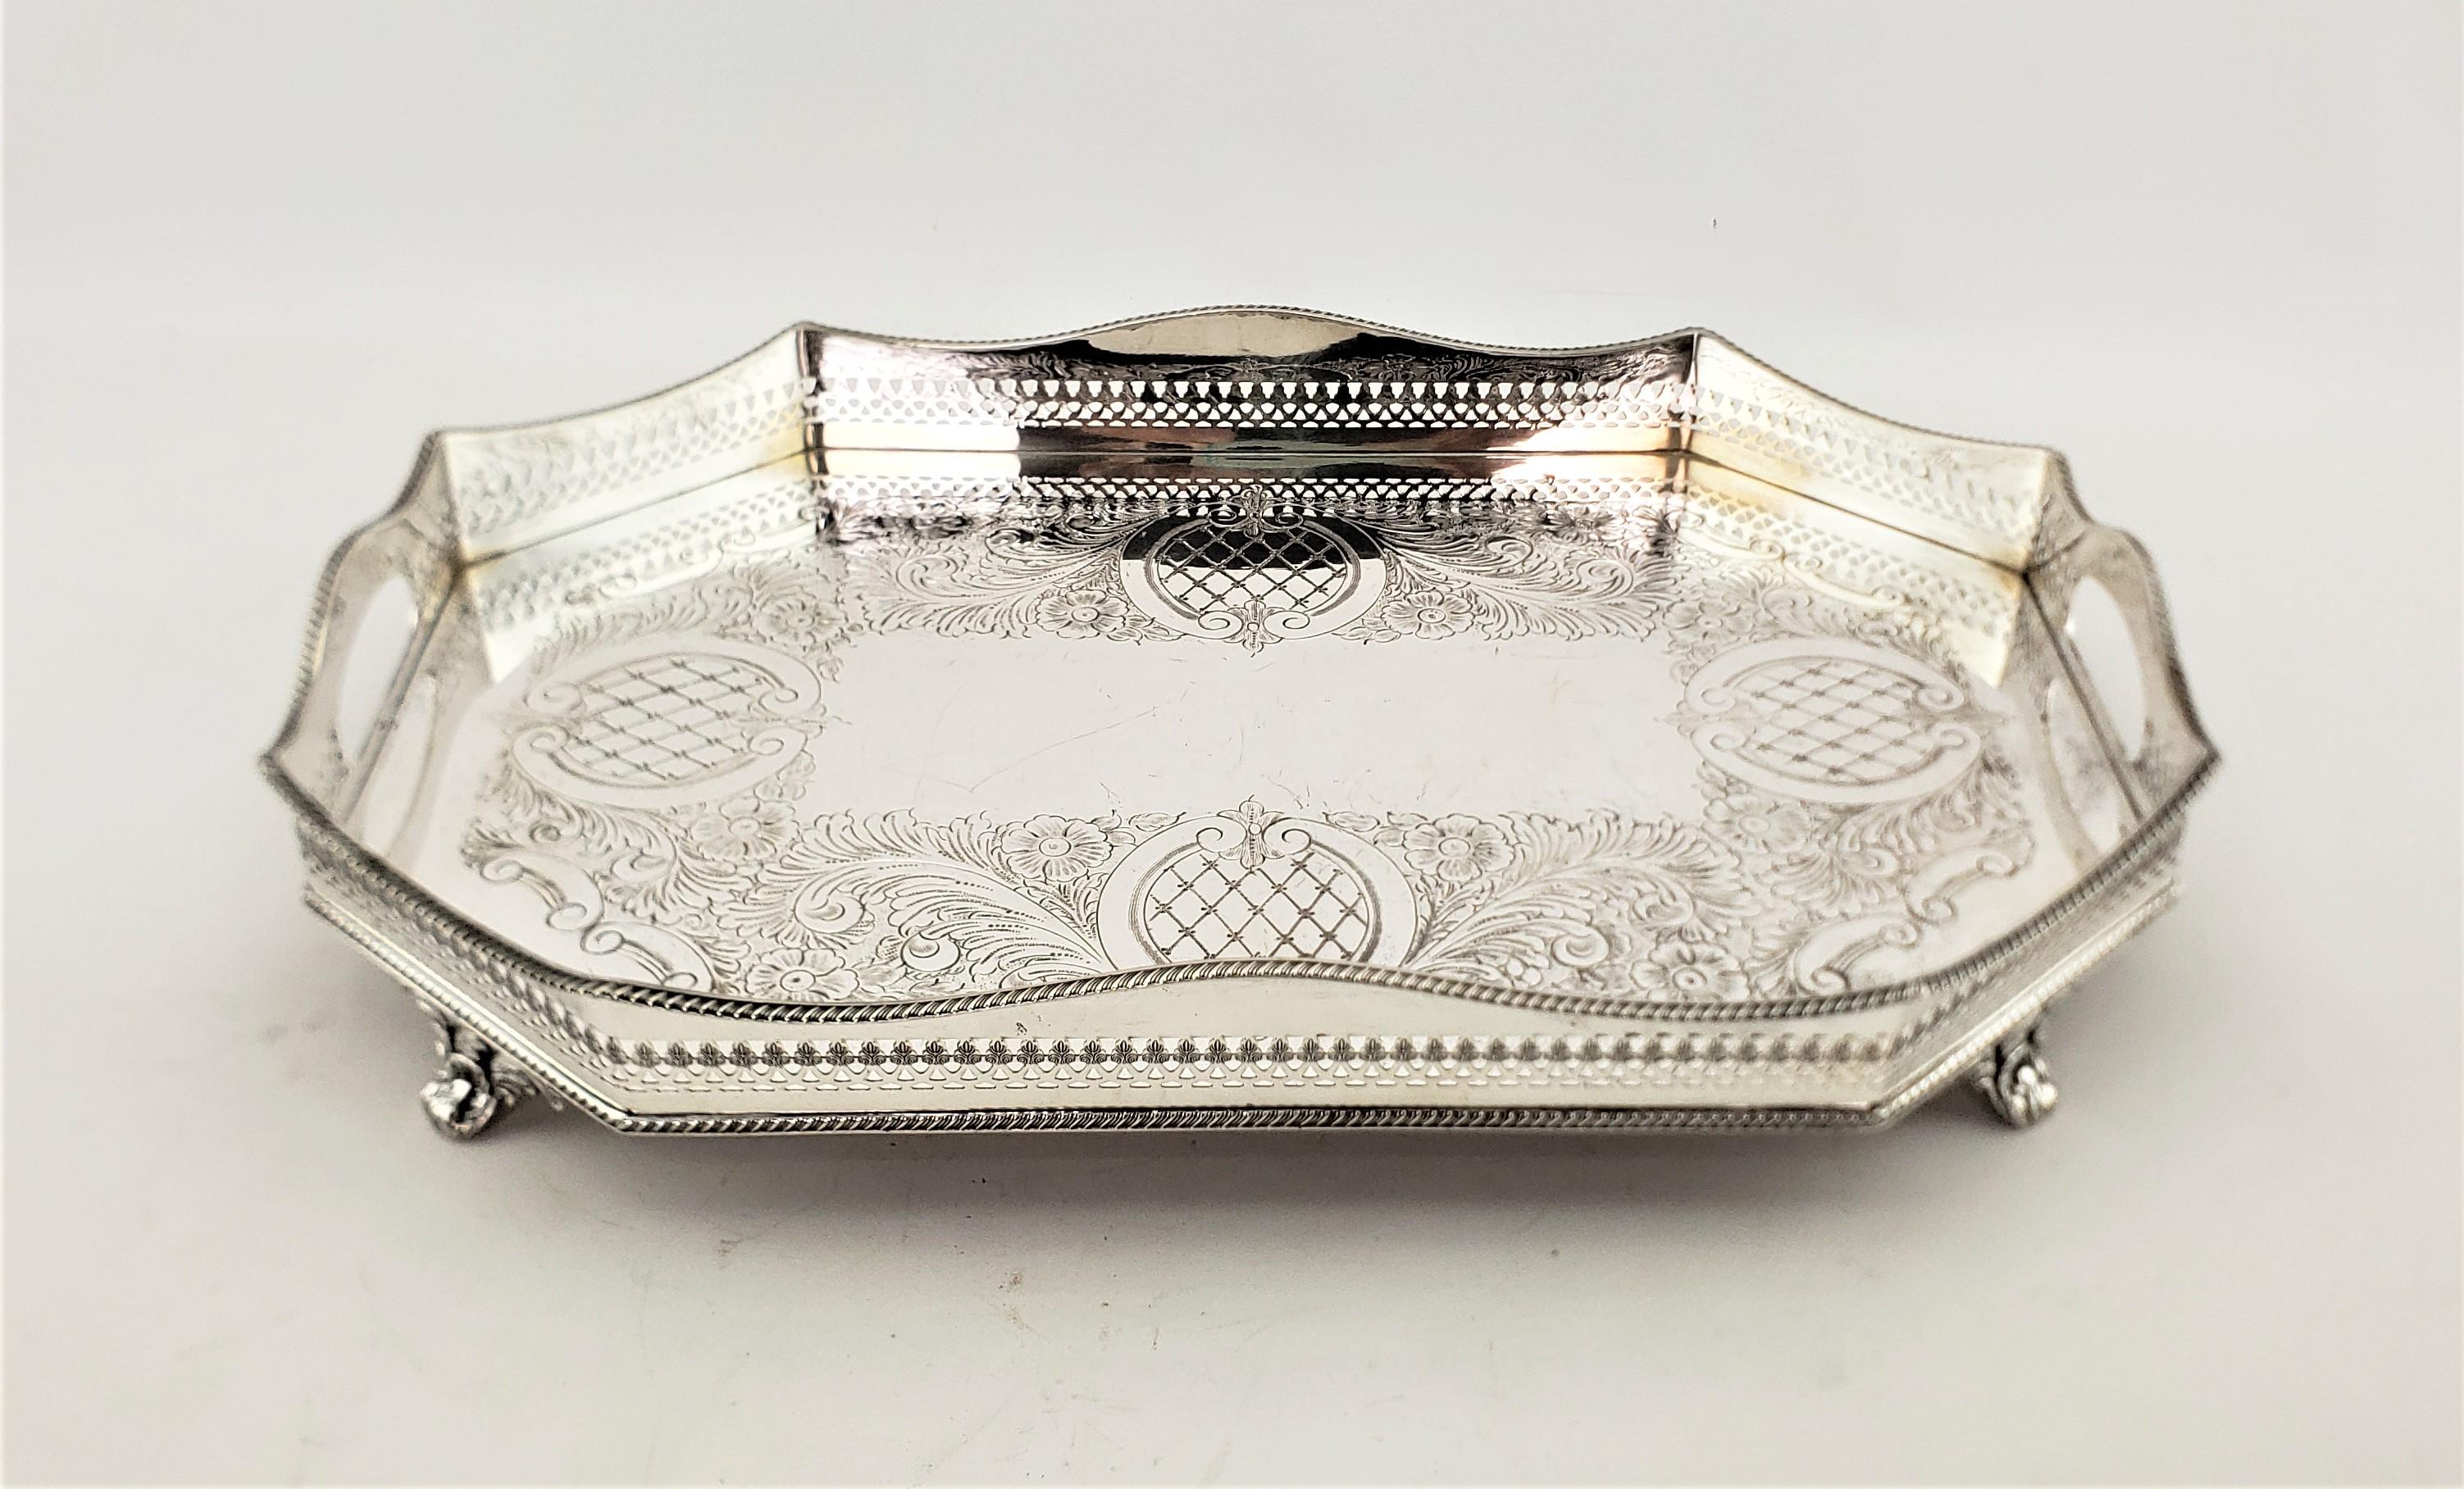 Machine-Made Antique English Silver Plated Footed Gallery Serving Tray with Ornate Engraving